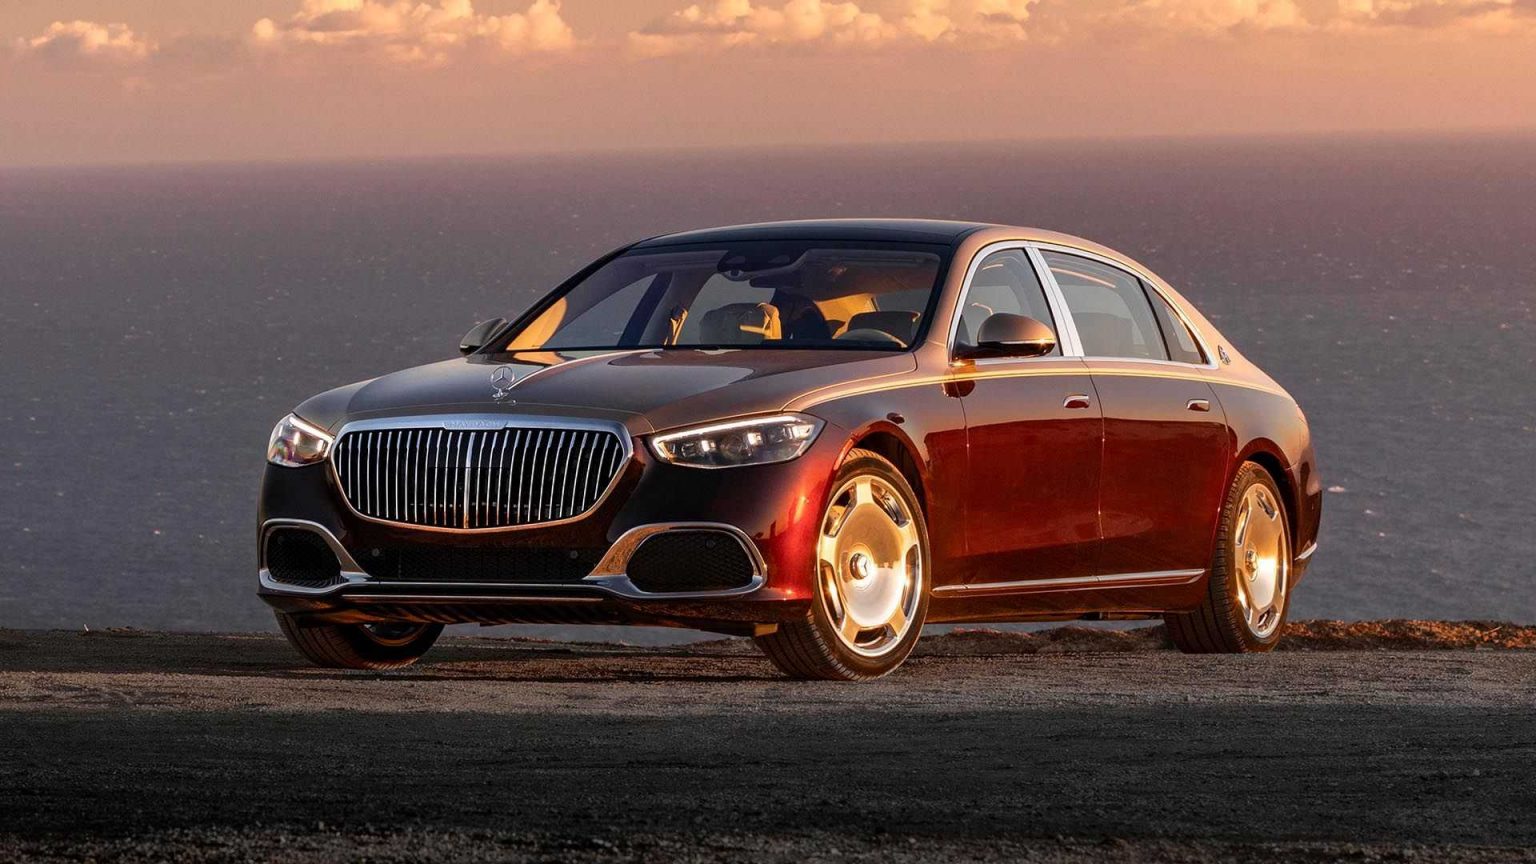 2021 Mercedes Maybach S580 Breaks Cover, To Offer Next Level Luxury